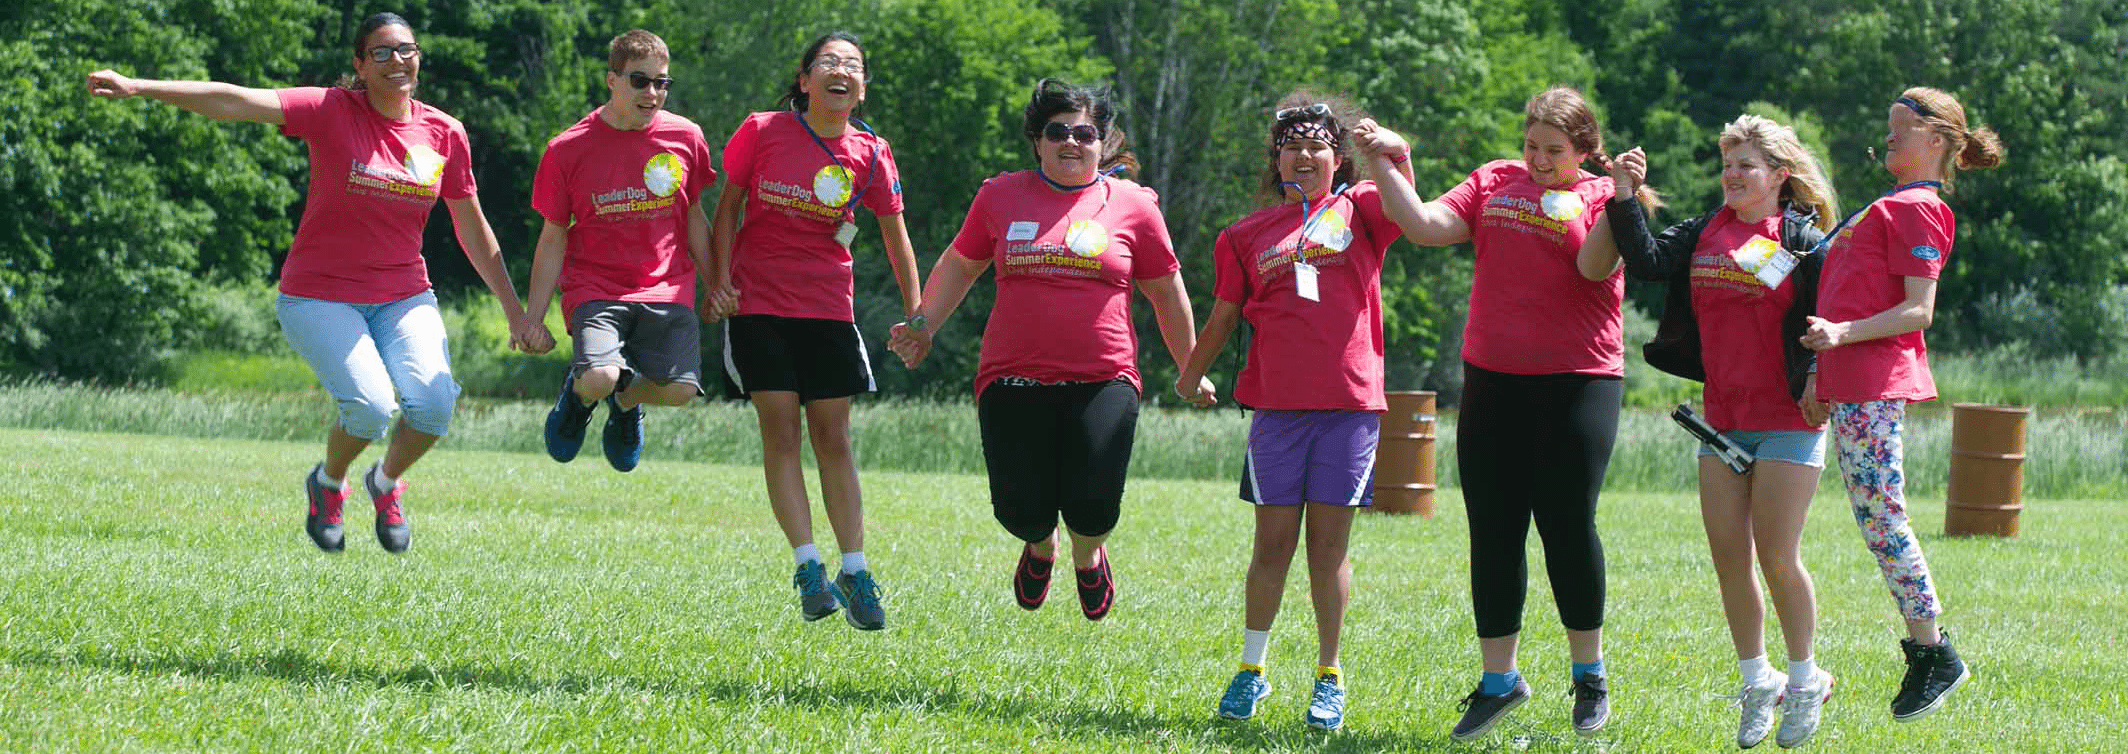 8 teenagers stand in a line holding hands in the middle of a field with trees in the background. Each wears a red summer experience camp tee shirt. The image captures them mid jump as they smile facing the camera.